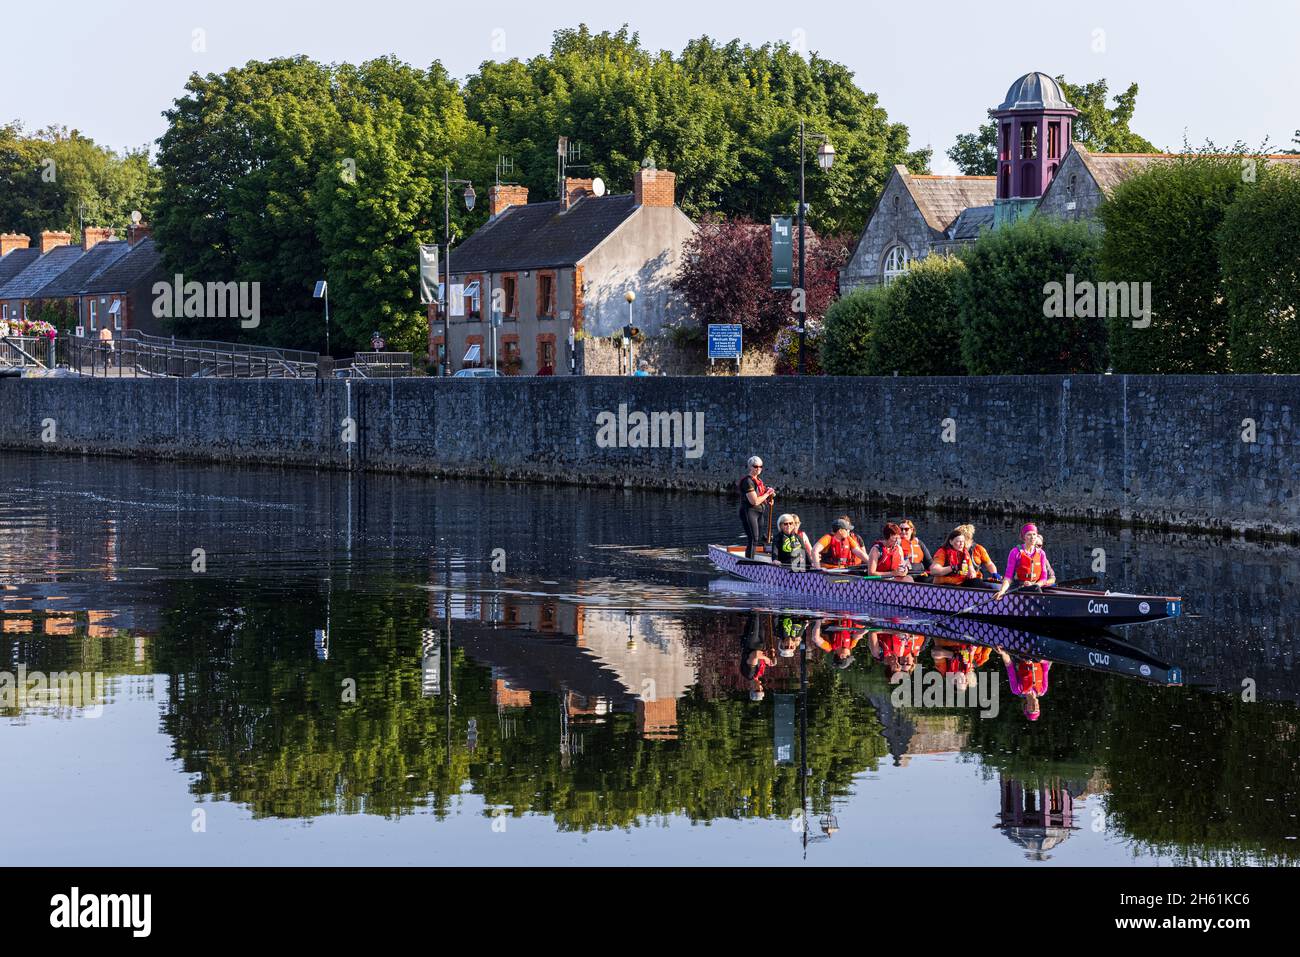 Dragon boat womens team training in their craft on the river Nore in Kilkenny, County Kilkenny, Ireland Stock Photo